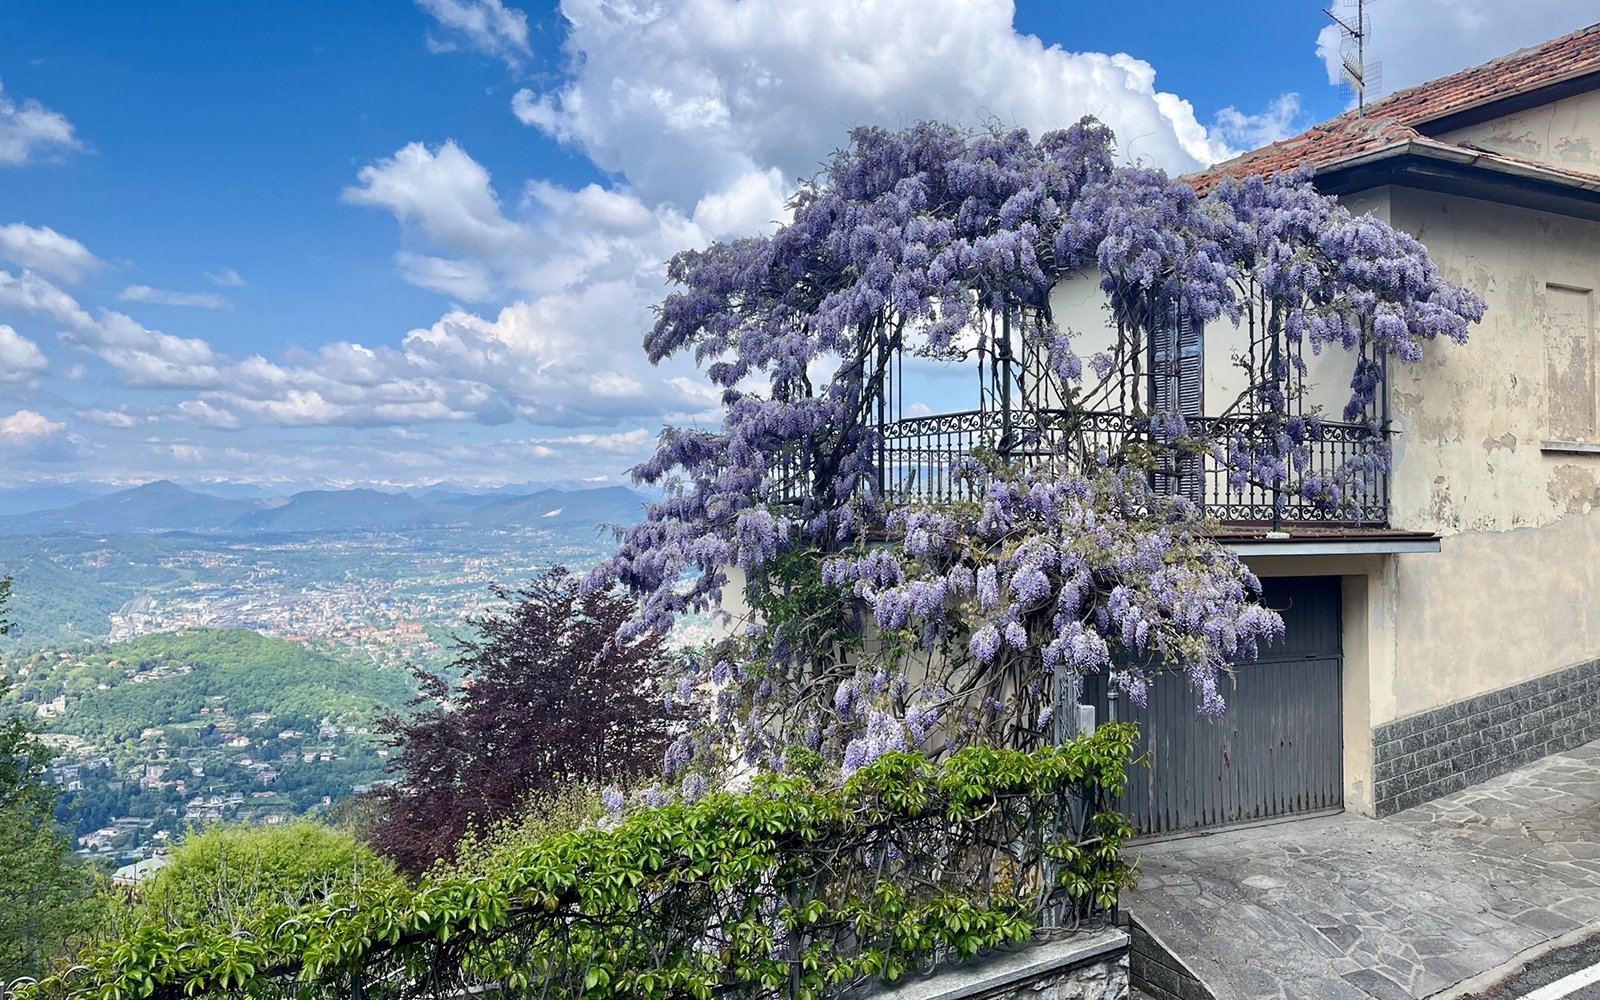 Flowers-covered building on mountain overlooking town